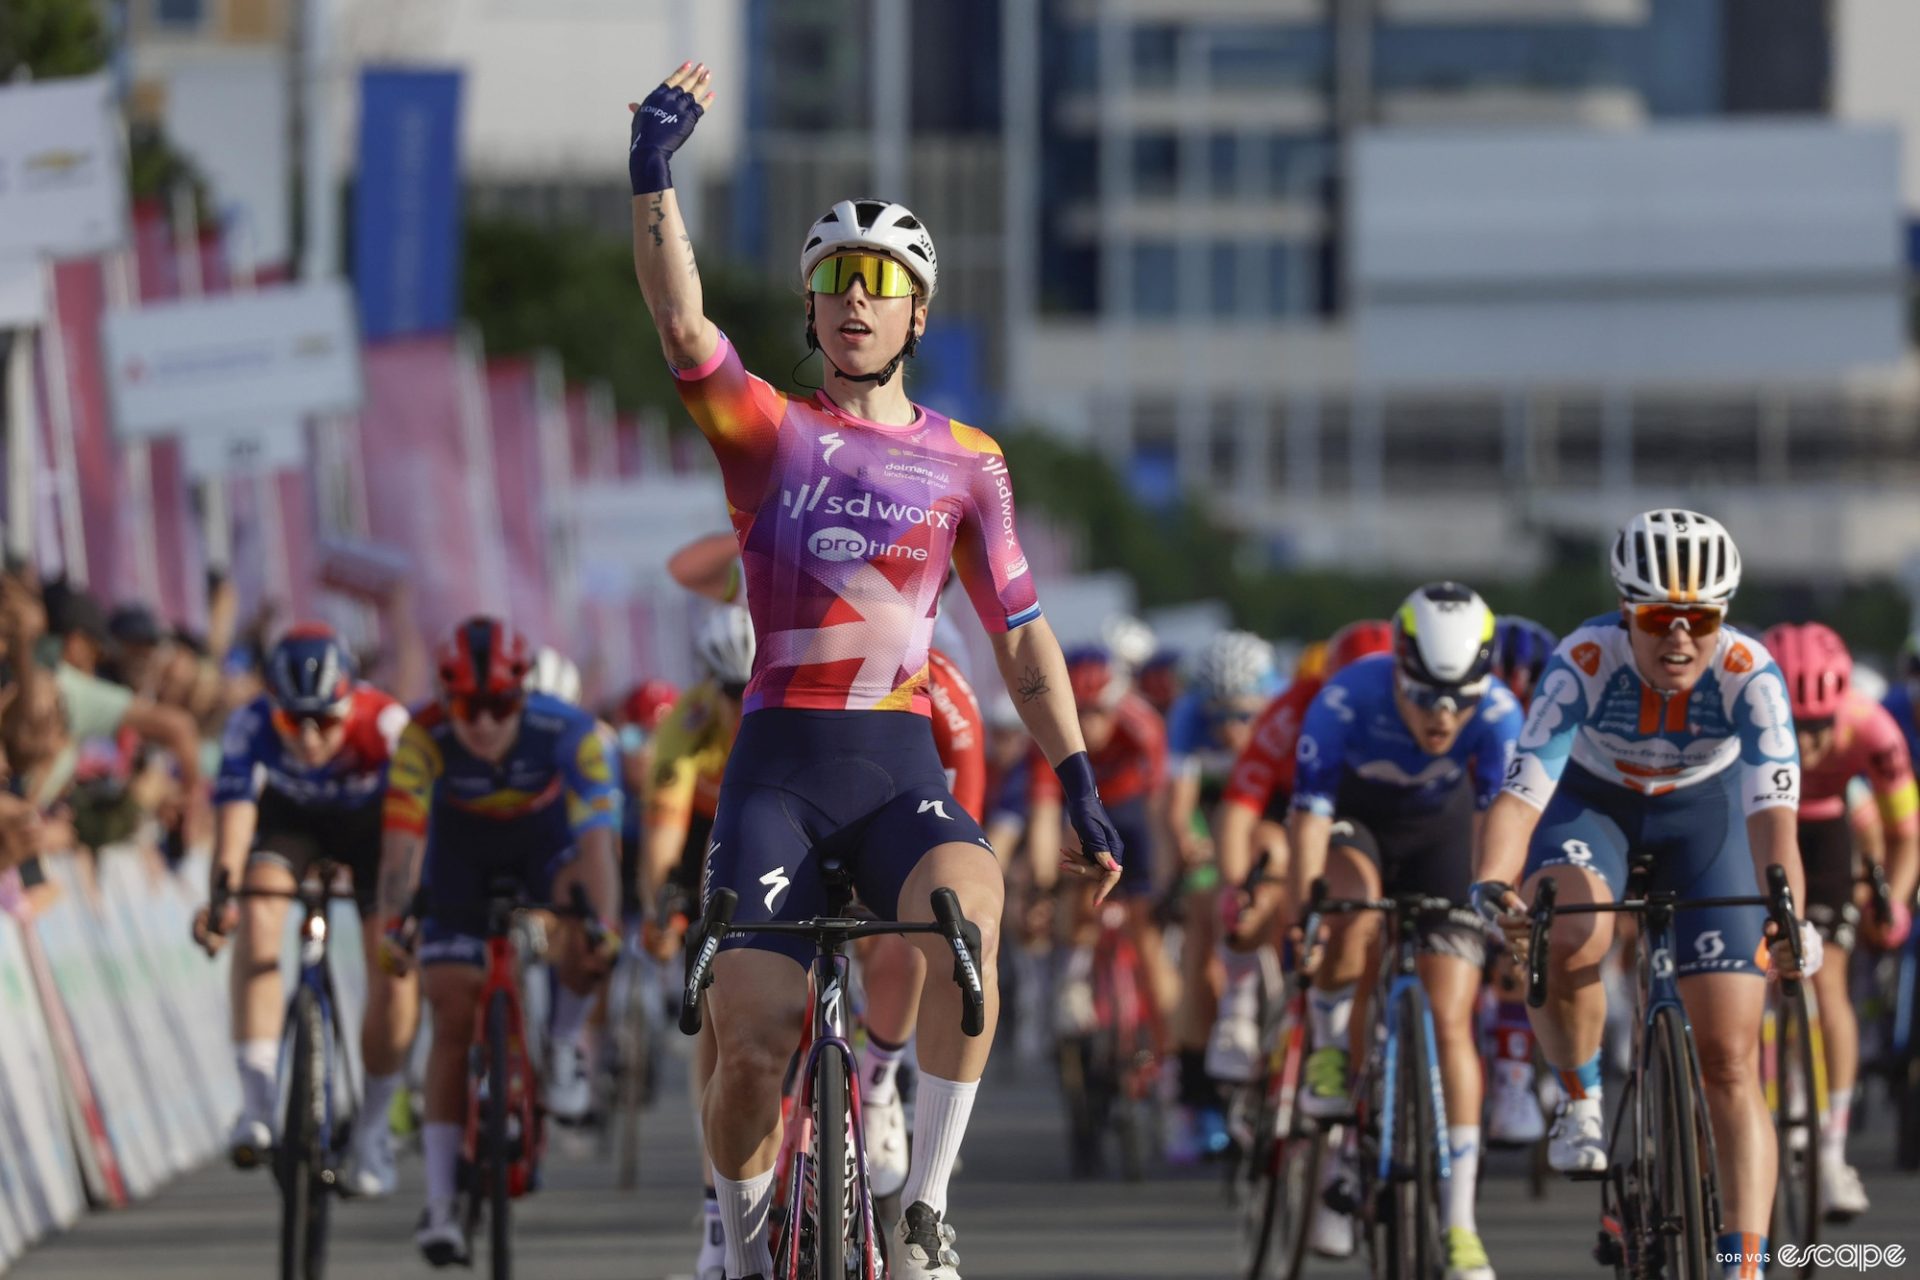 Lorena Wiebes raises her hand in victory at the finish of a bike race.